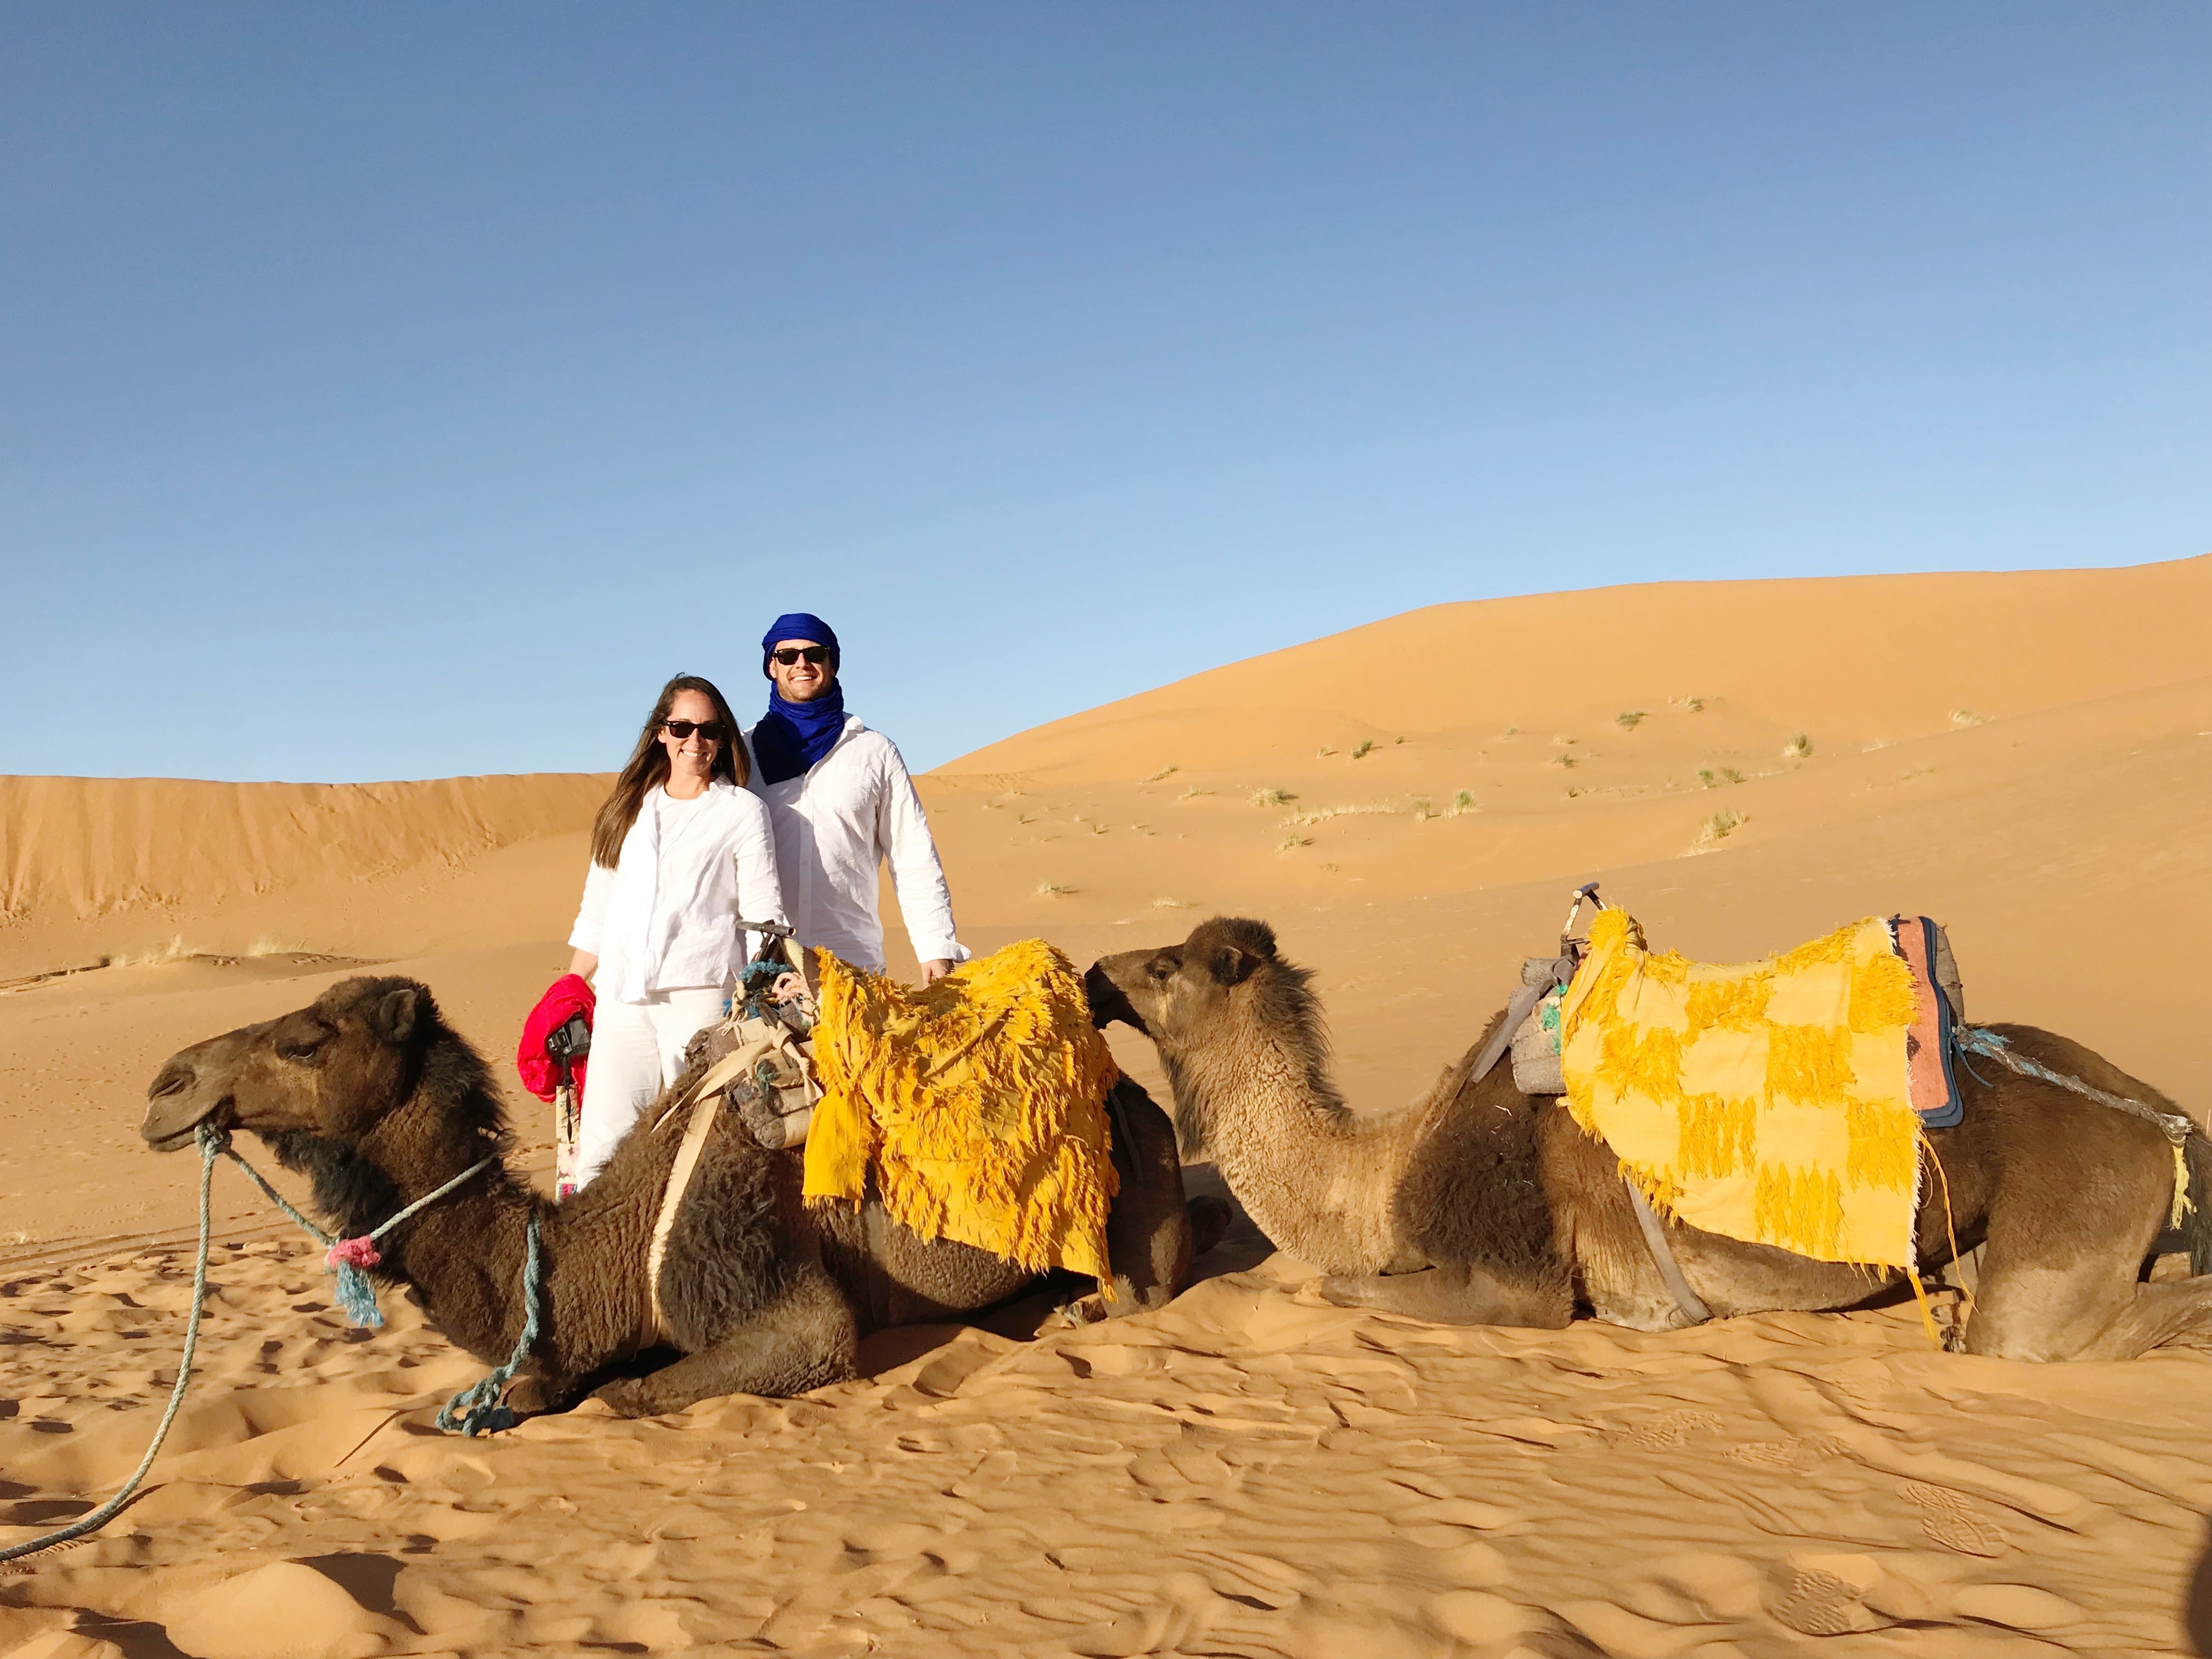 OUR LUXURY DESERT CAMP EXCURSION IN MOROCCO | Morocco Desert Camp - Desert Luxury Camp Morocco - Luxury Desert Camp Morocco - Morocco Sahara Desert Camp - Desert Camp Merzouga Morocco - Erg Chebbi Camp Morocco - Camping Morocco - Best Luxury Desert Camp Morocco - Sahara Desert Camp - Dar Jnan Tiouira - Erg Chebbi Sand Dunes - Morocco Travel Blog - #morocco #saharadesert #travelblog